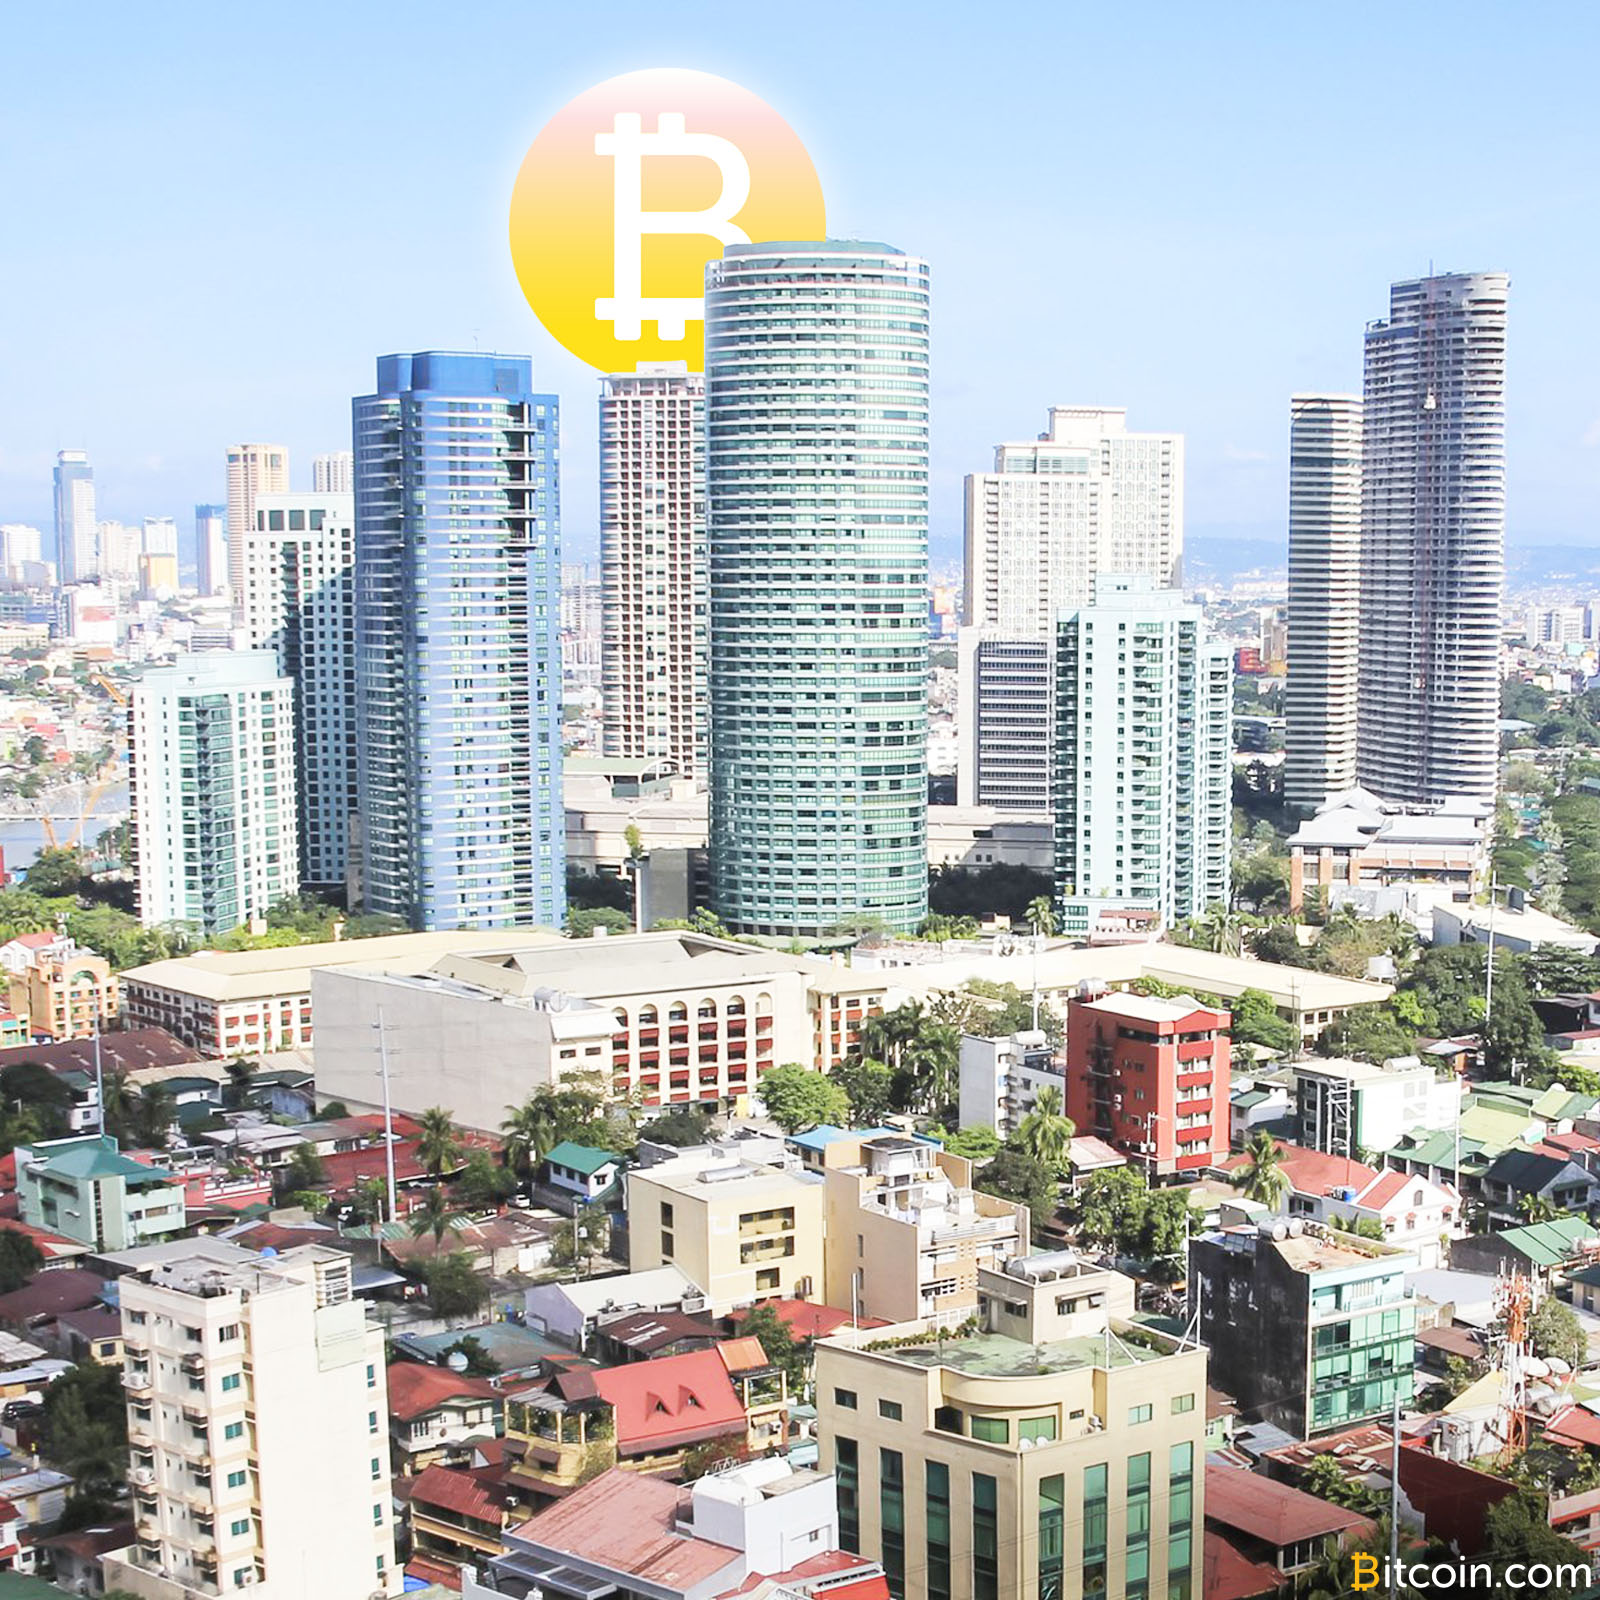 Philippines to Legalize Bitcoin as a Security